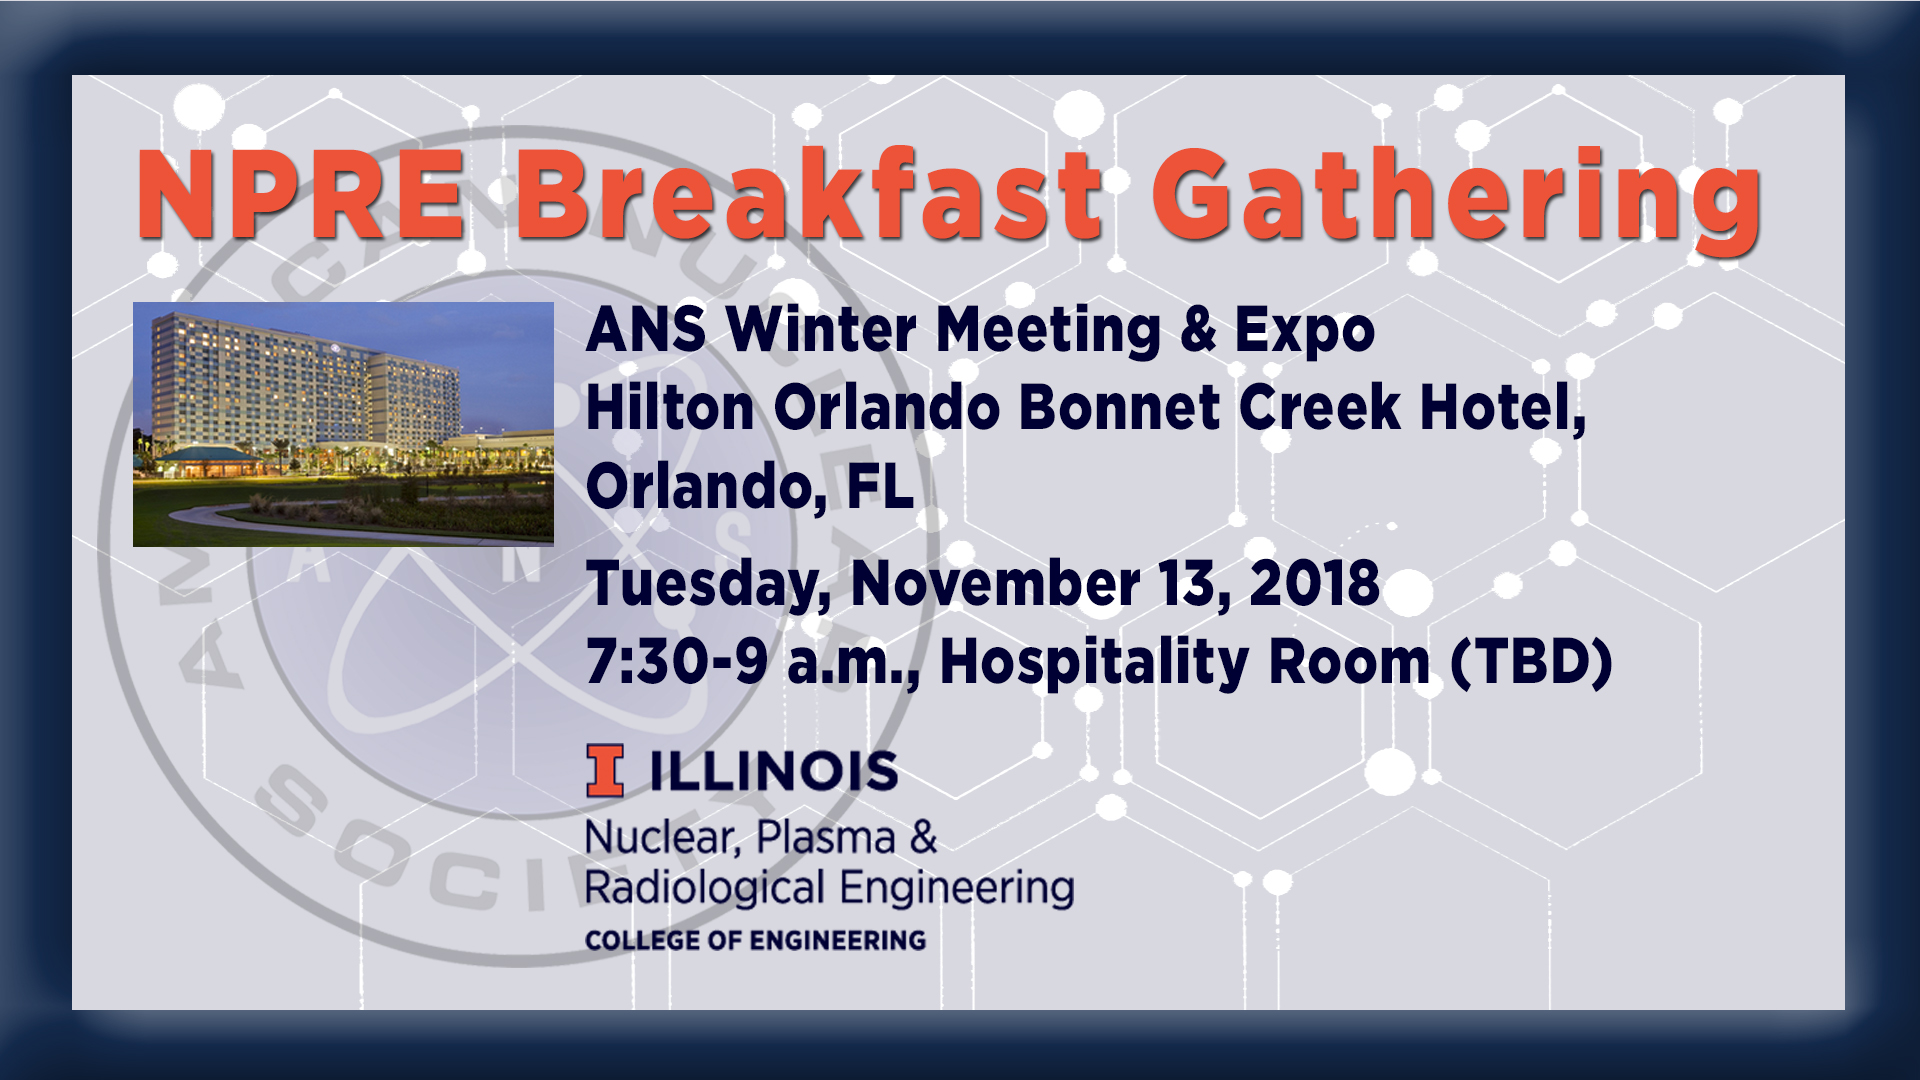 NPRE to host breakfast gathering during ANS Winter Meeting